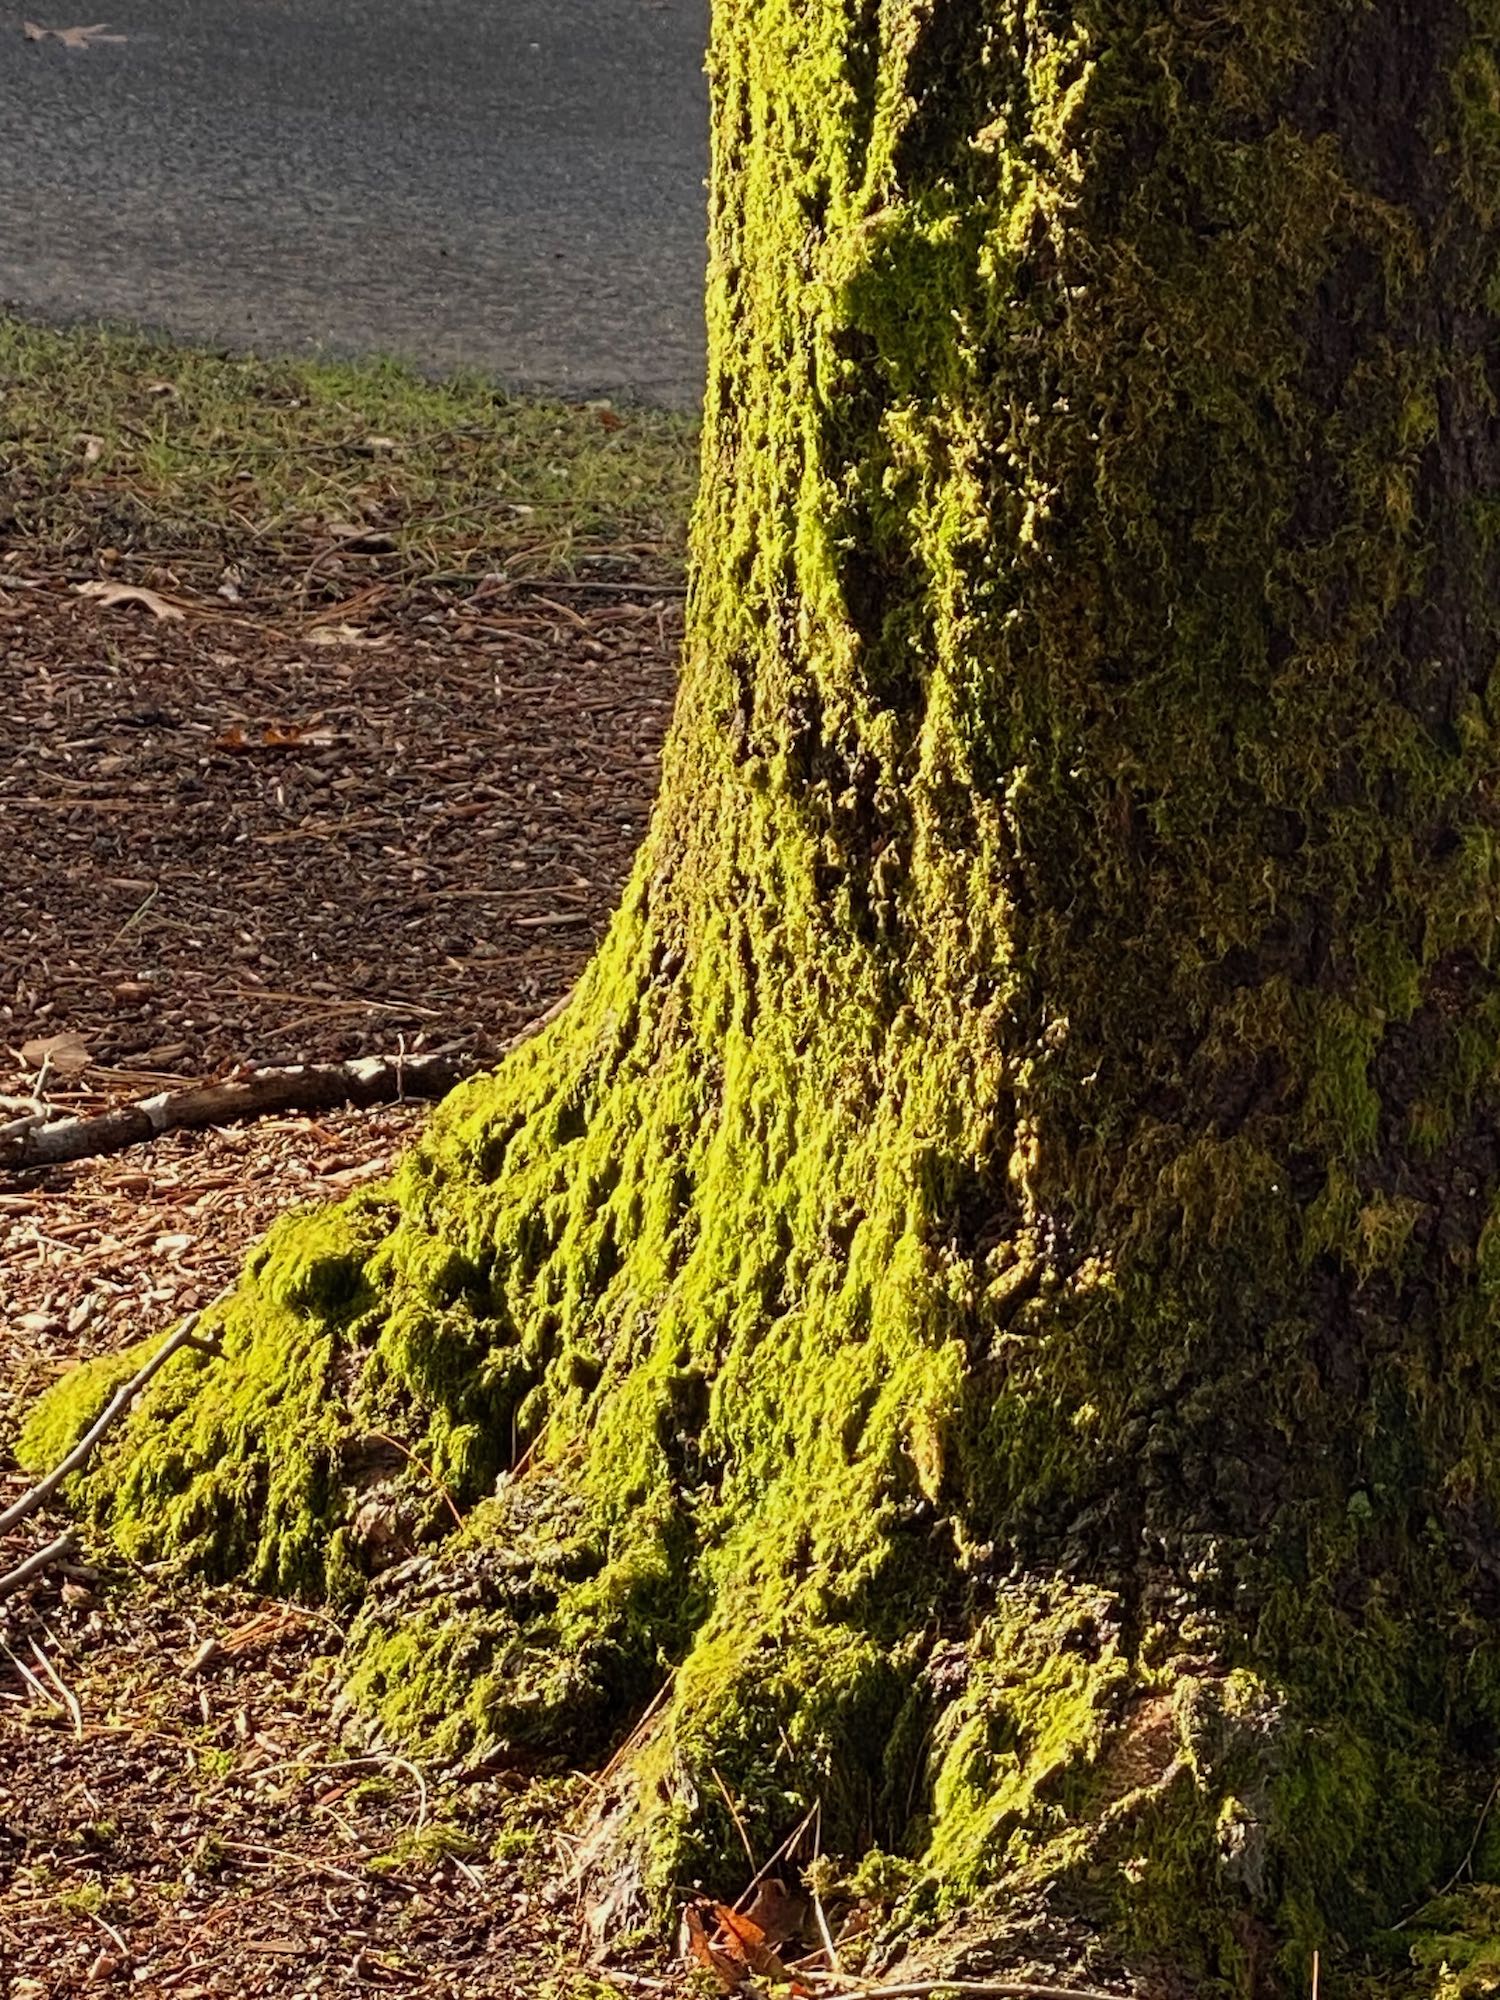 It's the weekend! Number 319, Sun on the Base of a Moss-Covered Tree